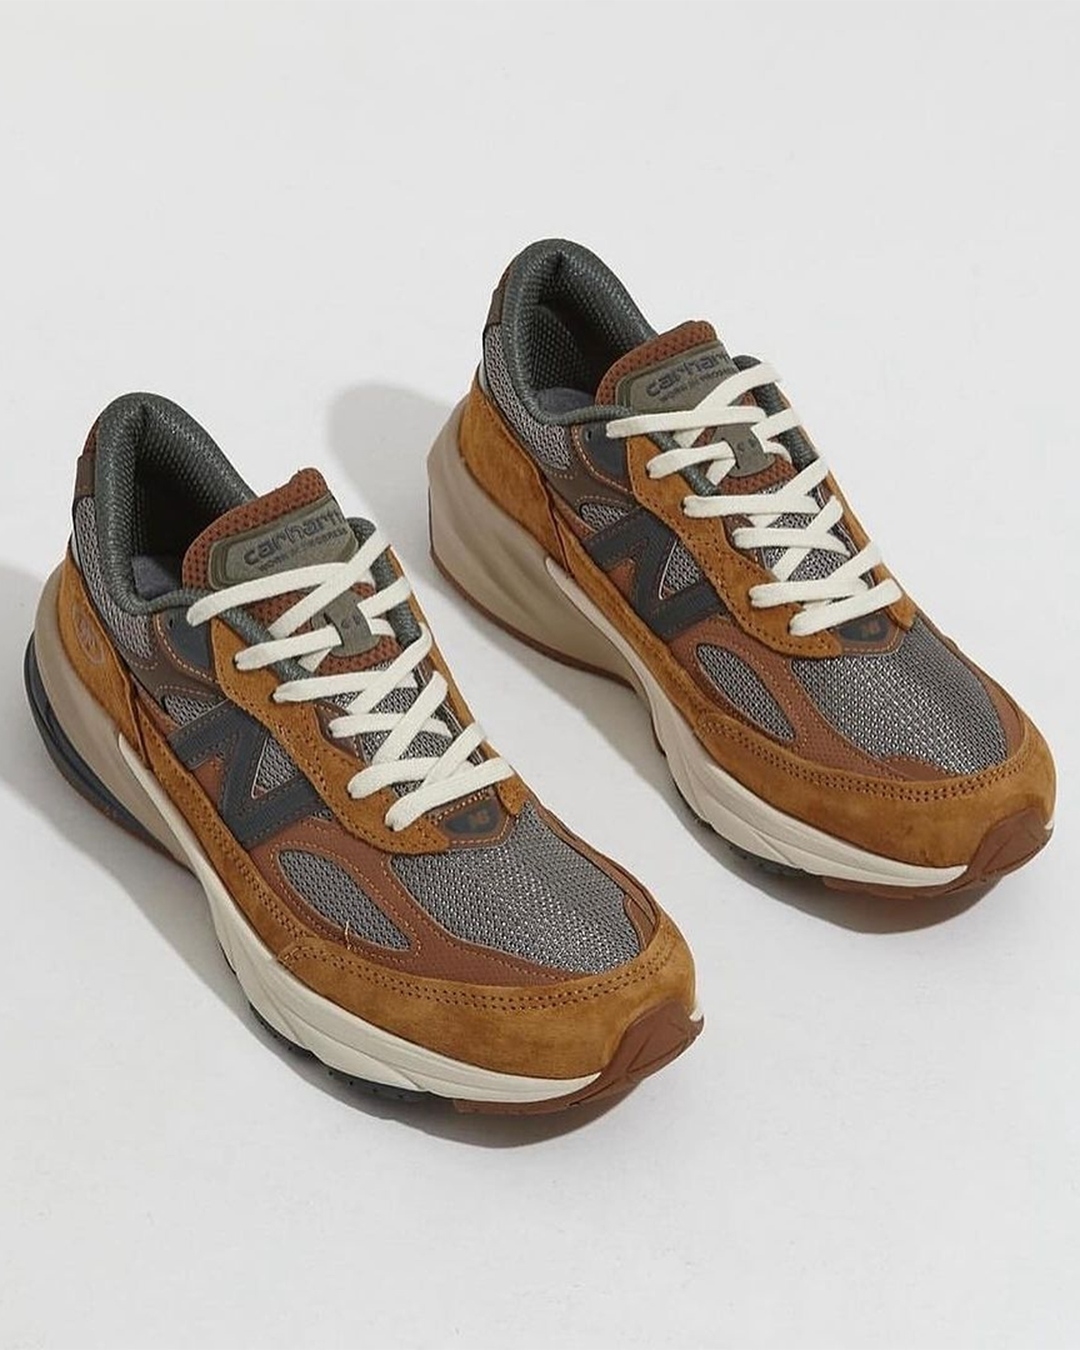 Carhartt WIP x New Balance 990v6 Collab Release Date | Complex